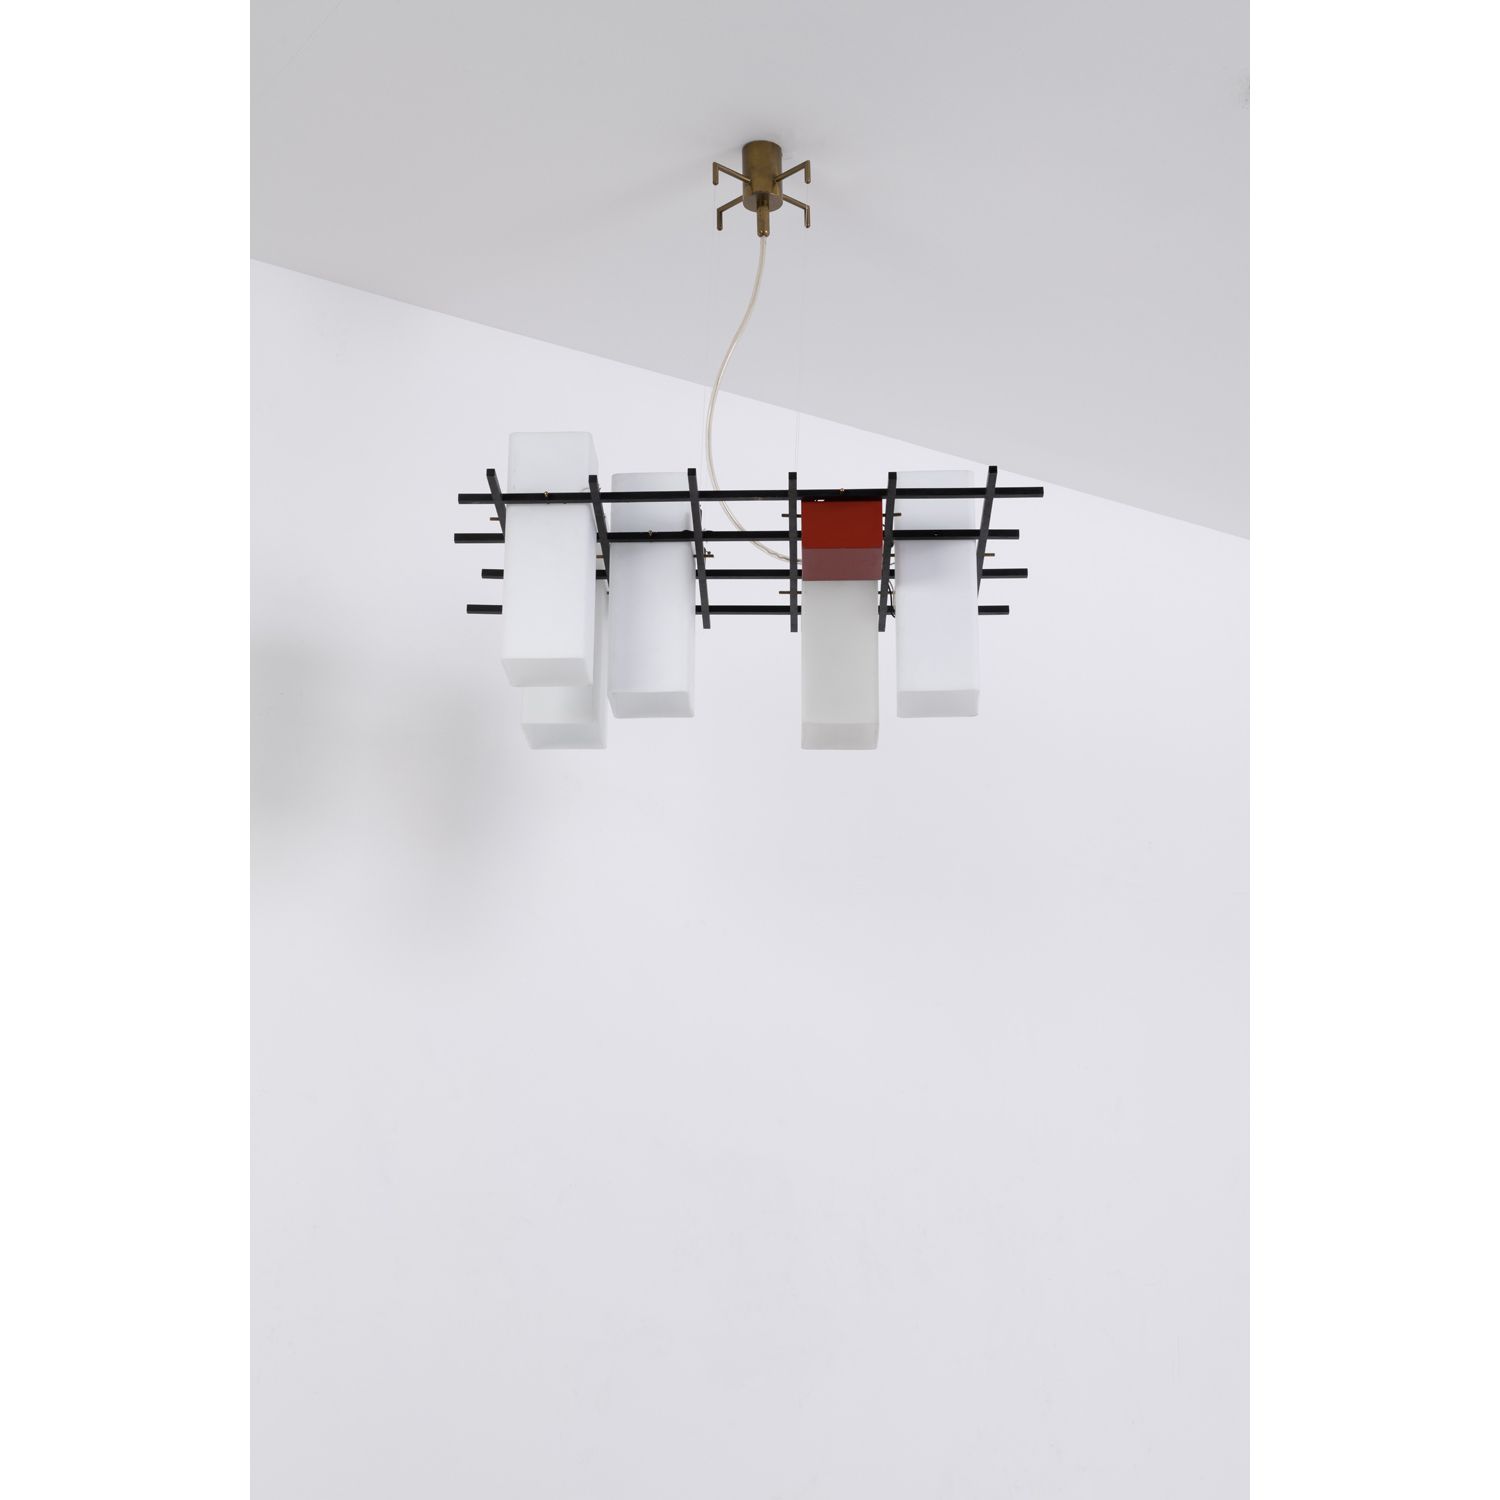 Null Angelo Lelii (1915-1987)

Suspension

Lacquered metal, brass and opaque gla&hellip;